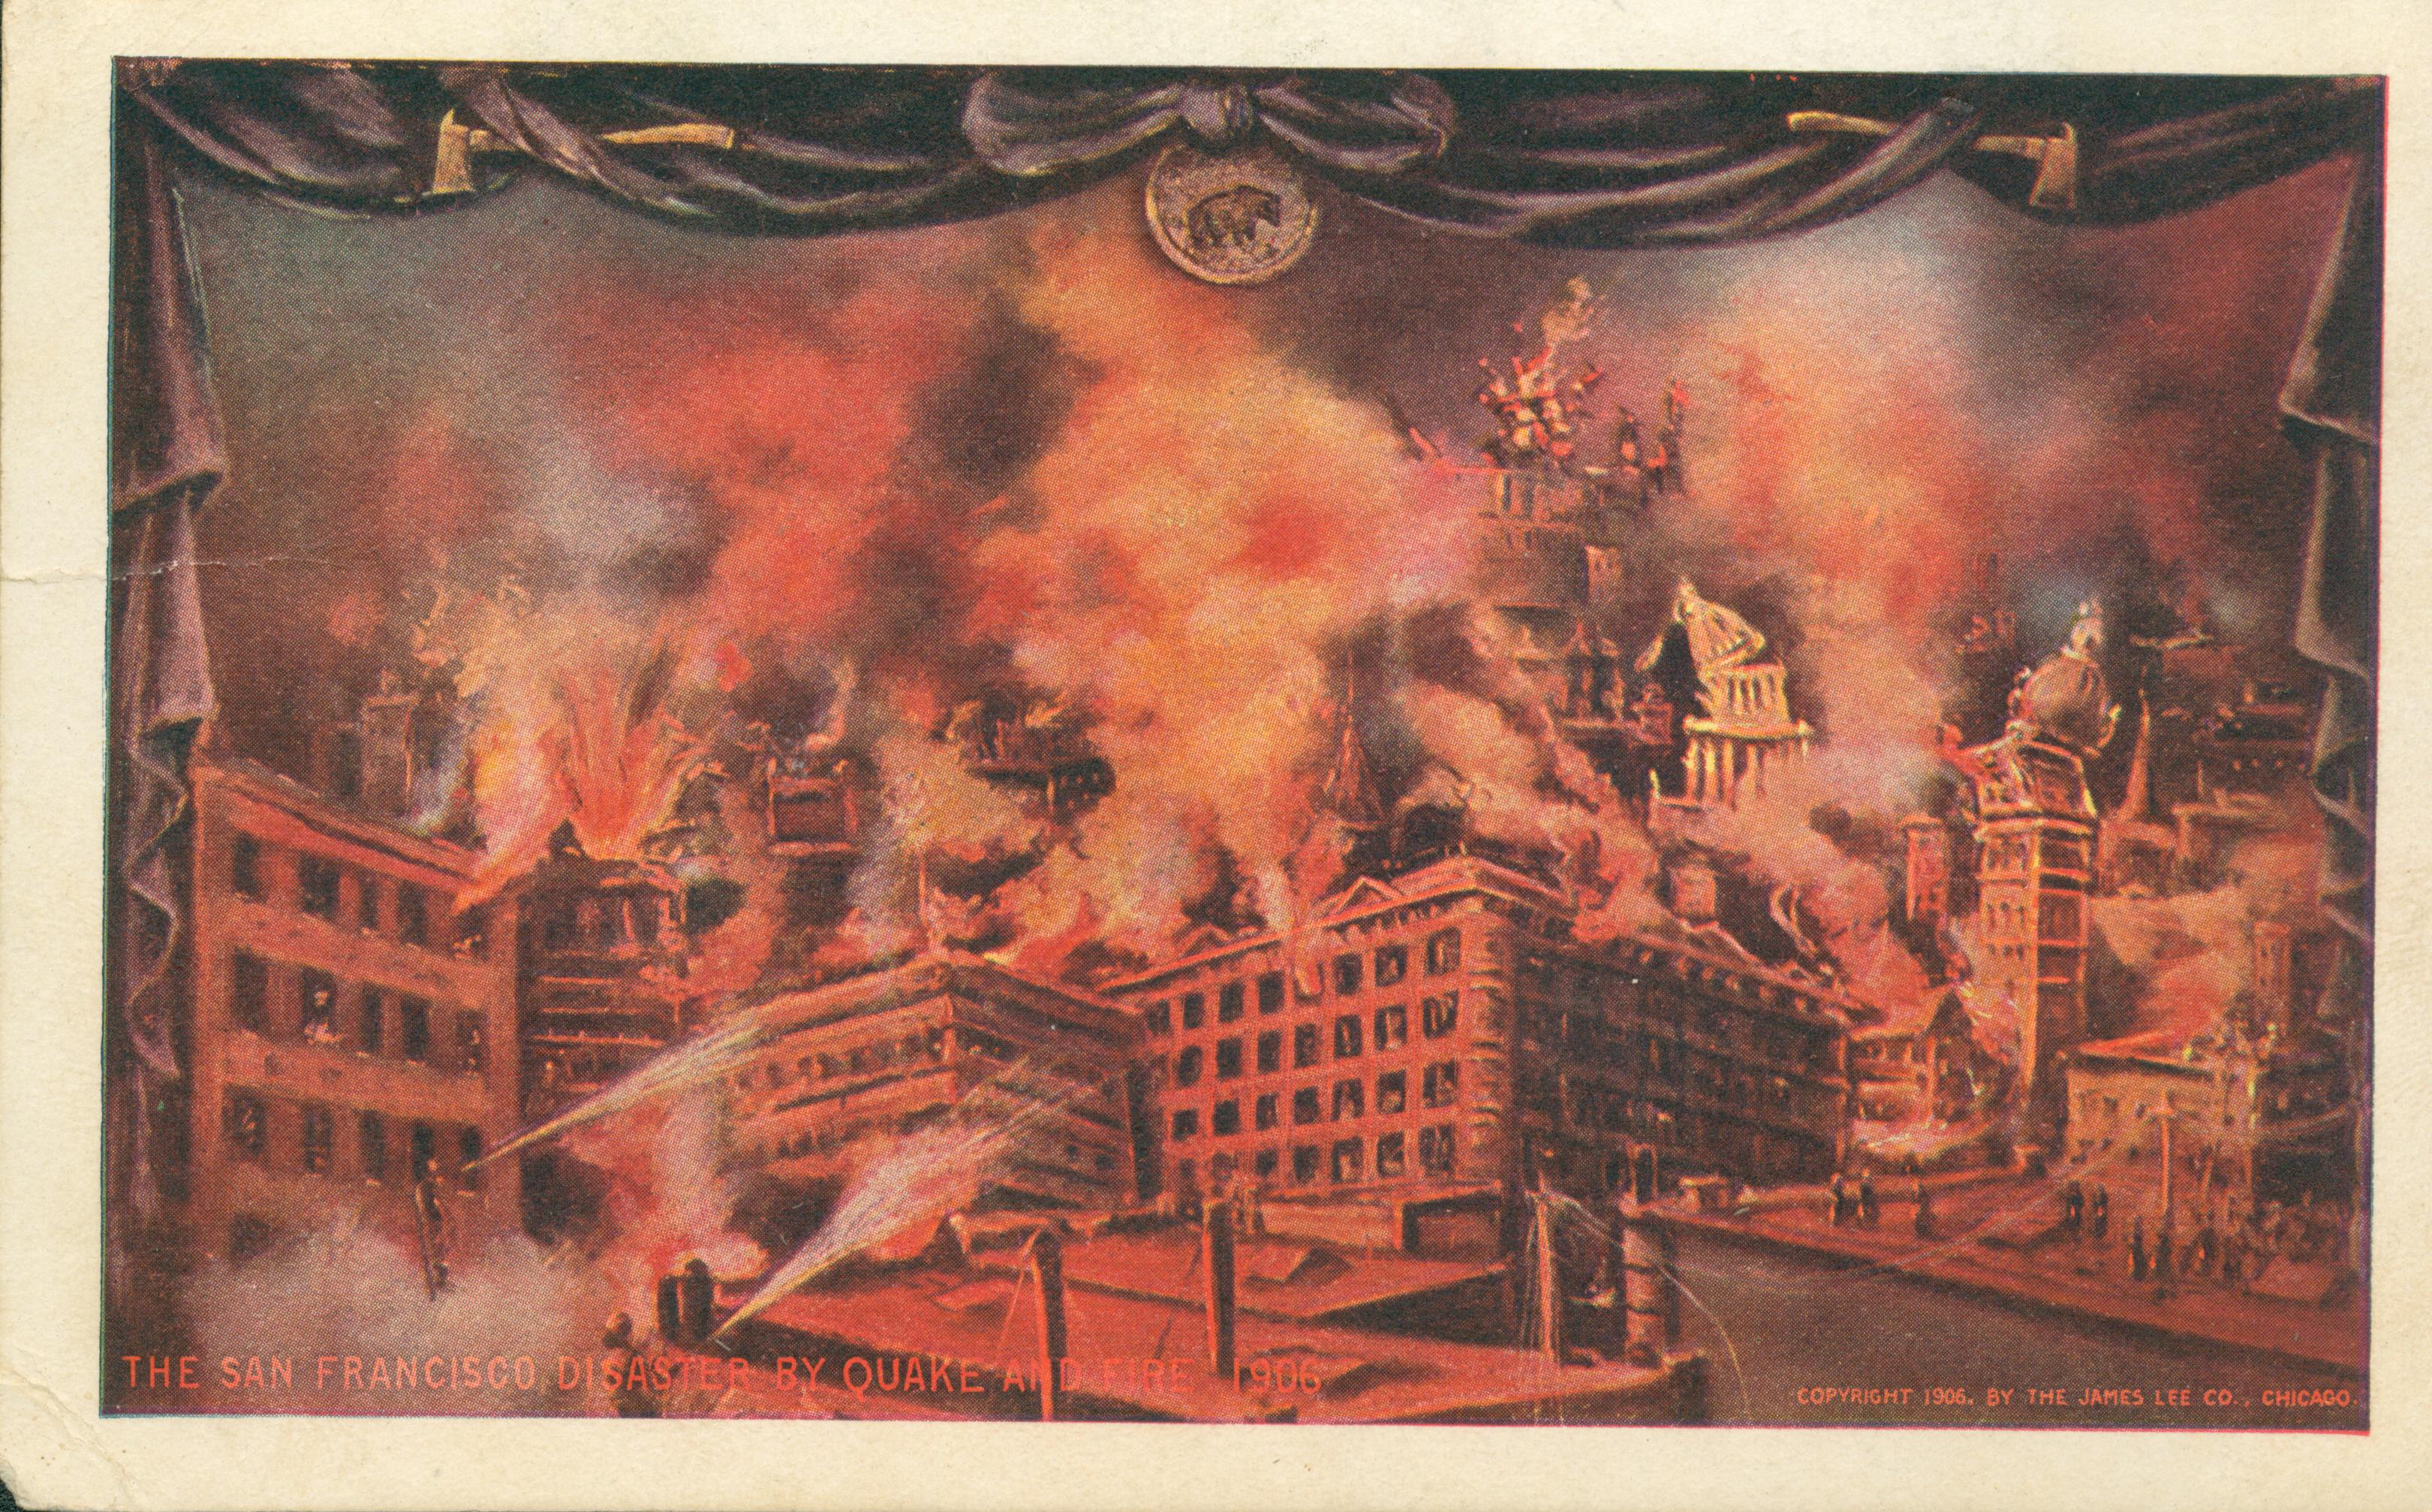 Shows a stage set of San Francisco burning